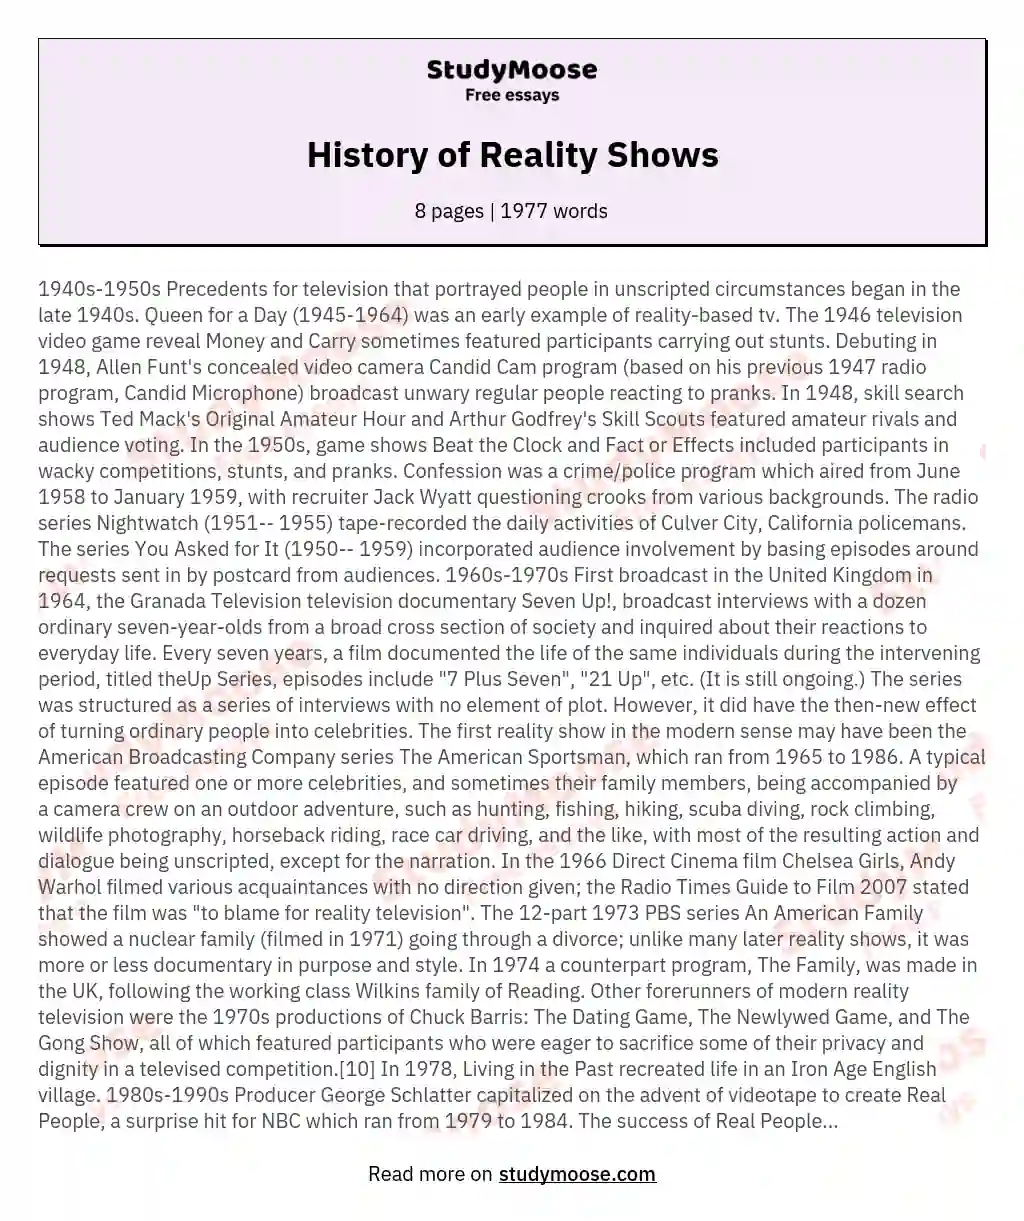 History of Reality Shows